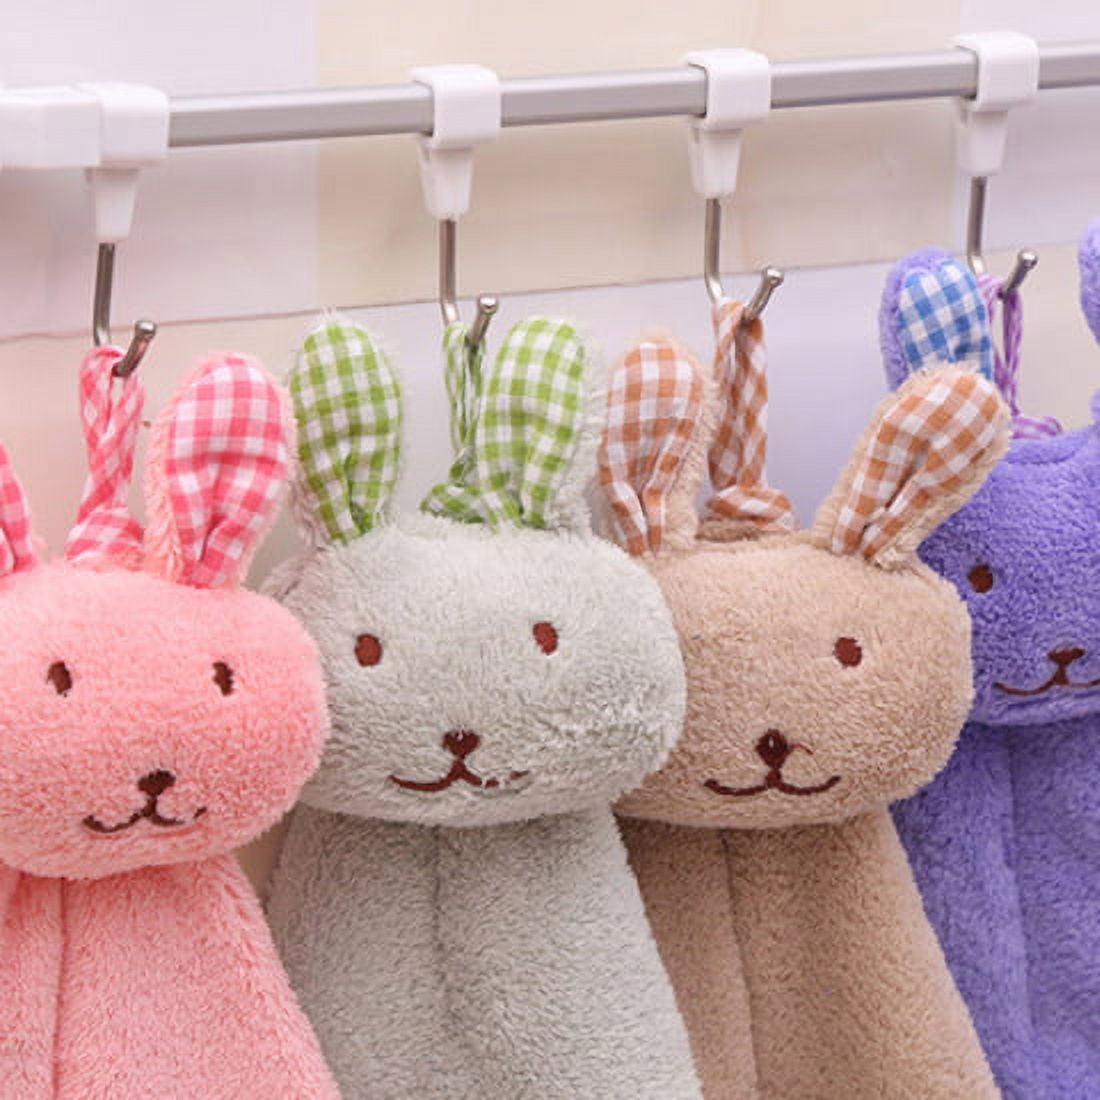 VSER 4 Pack Hanging Hand Towels for Bathroom&Kitchen,Ultra Thick Hand Towel  with Hanging Loop,Cute Child/Kids Microfiber Rabbit Hand